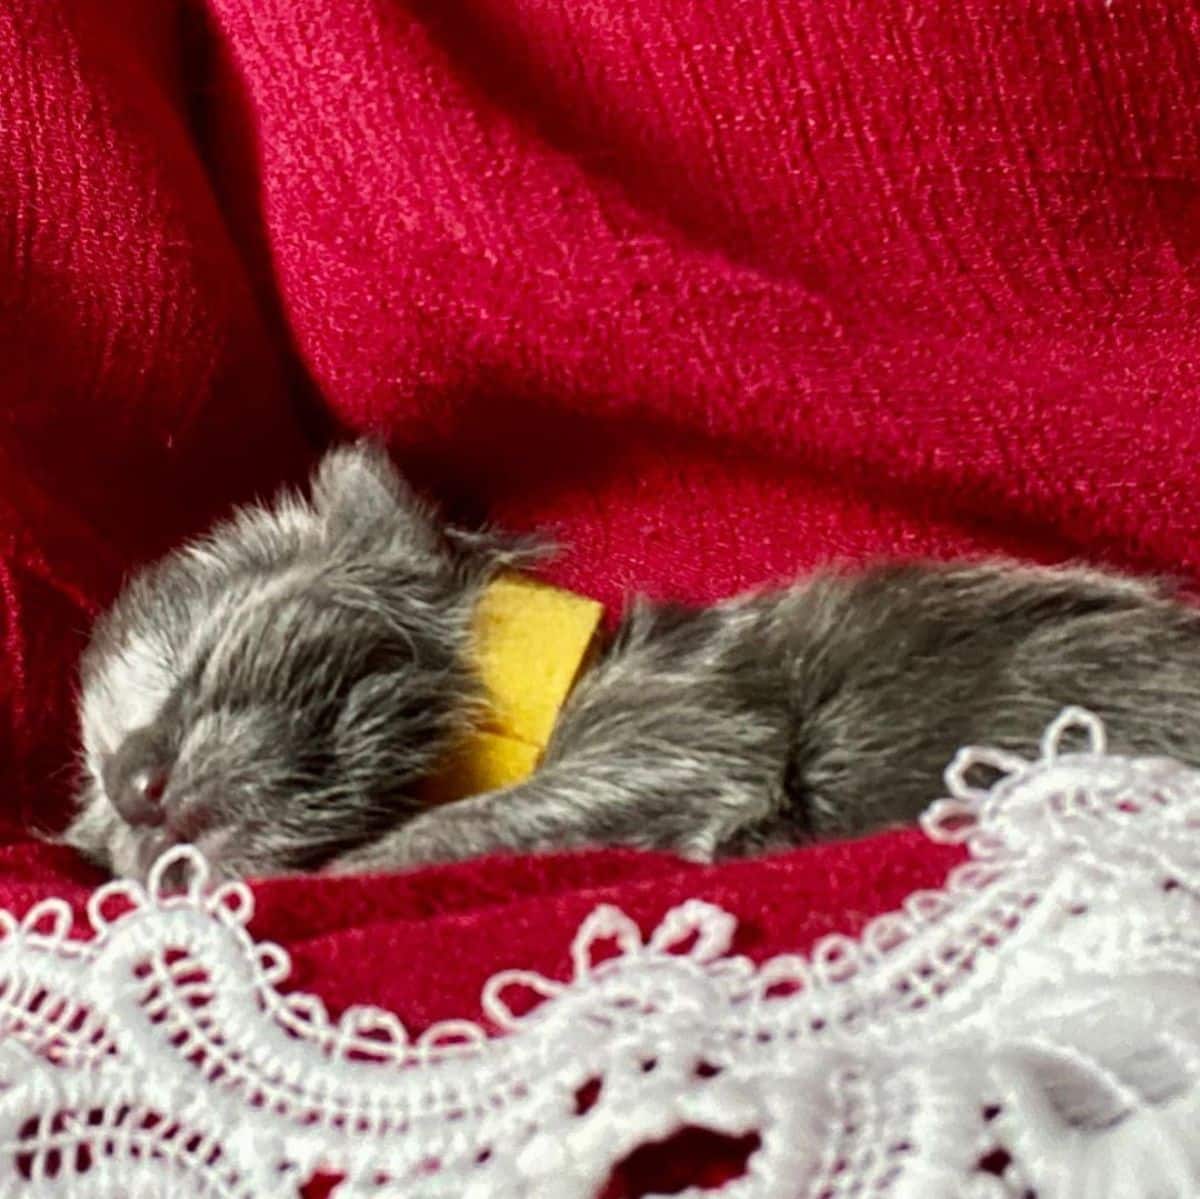 A cute gray maine coon kitten sleeping on a red blanket.